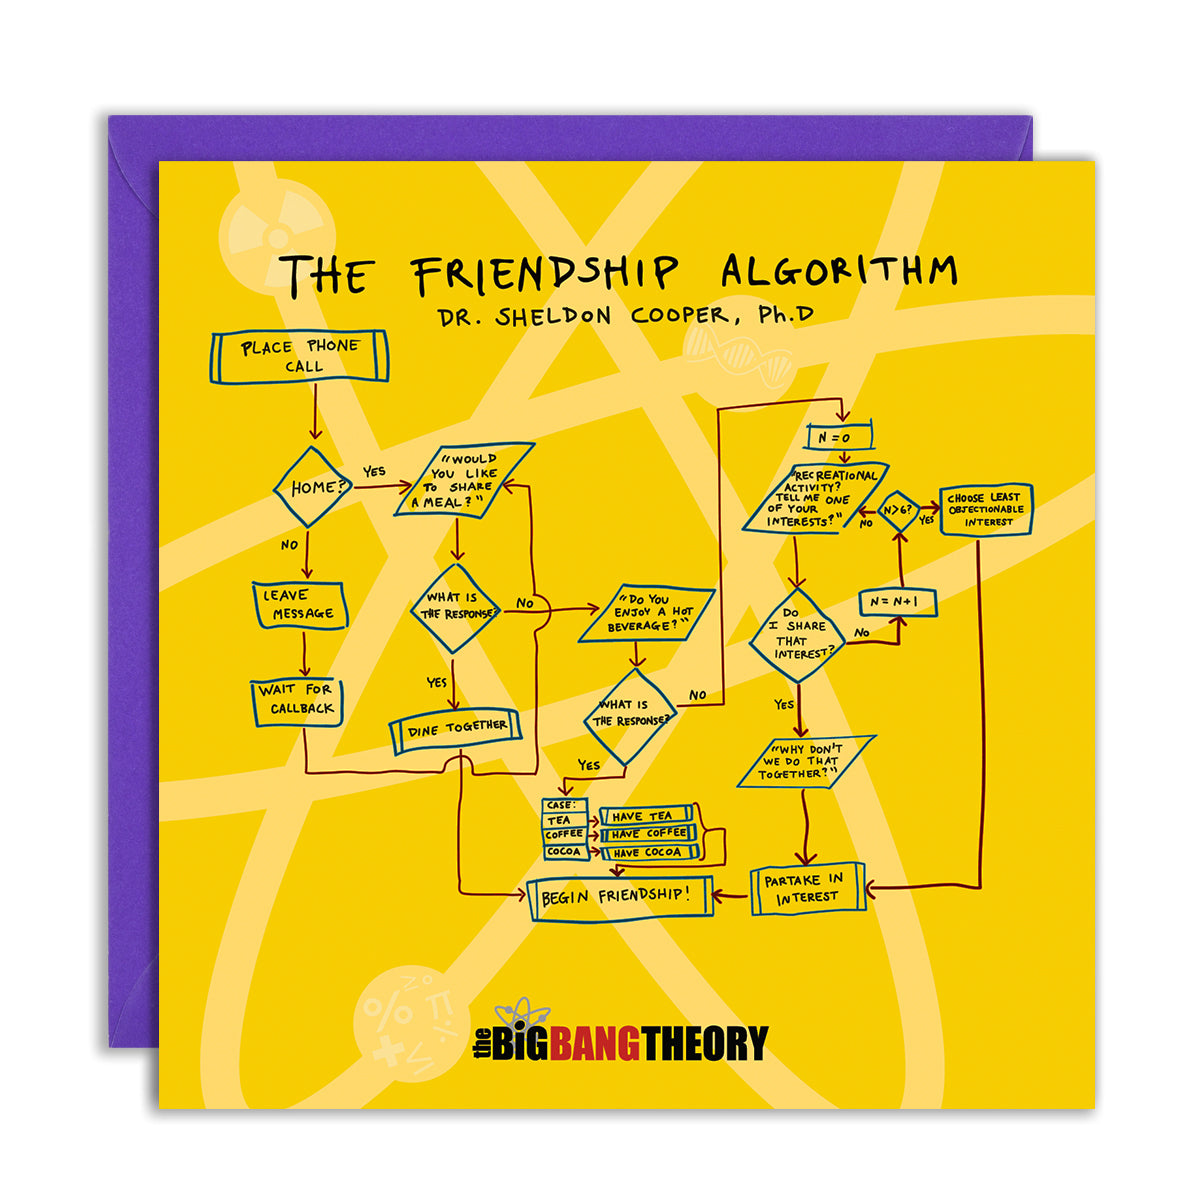 The Big Bang Theory Friendship Card - The Friendship Algorithm - Yellow Card